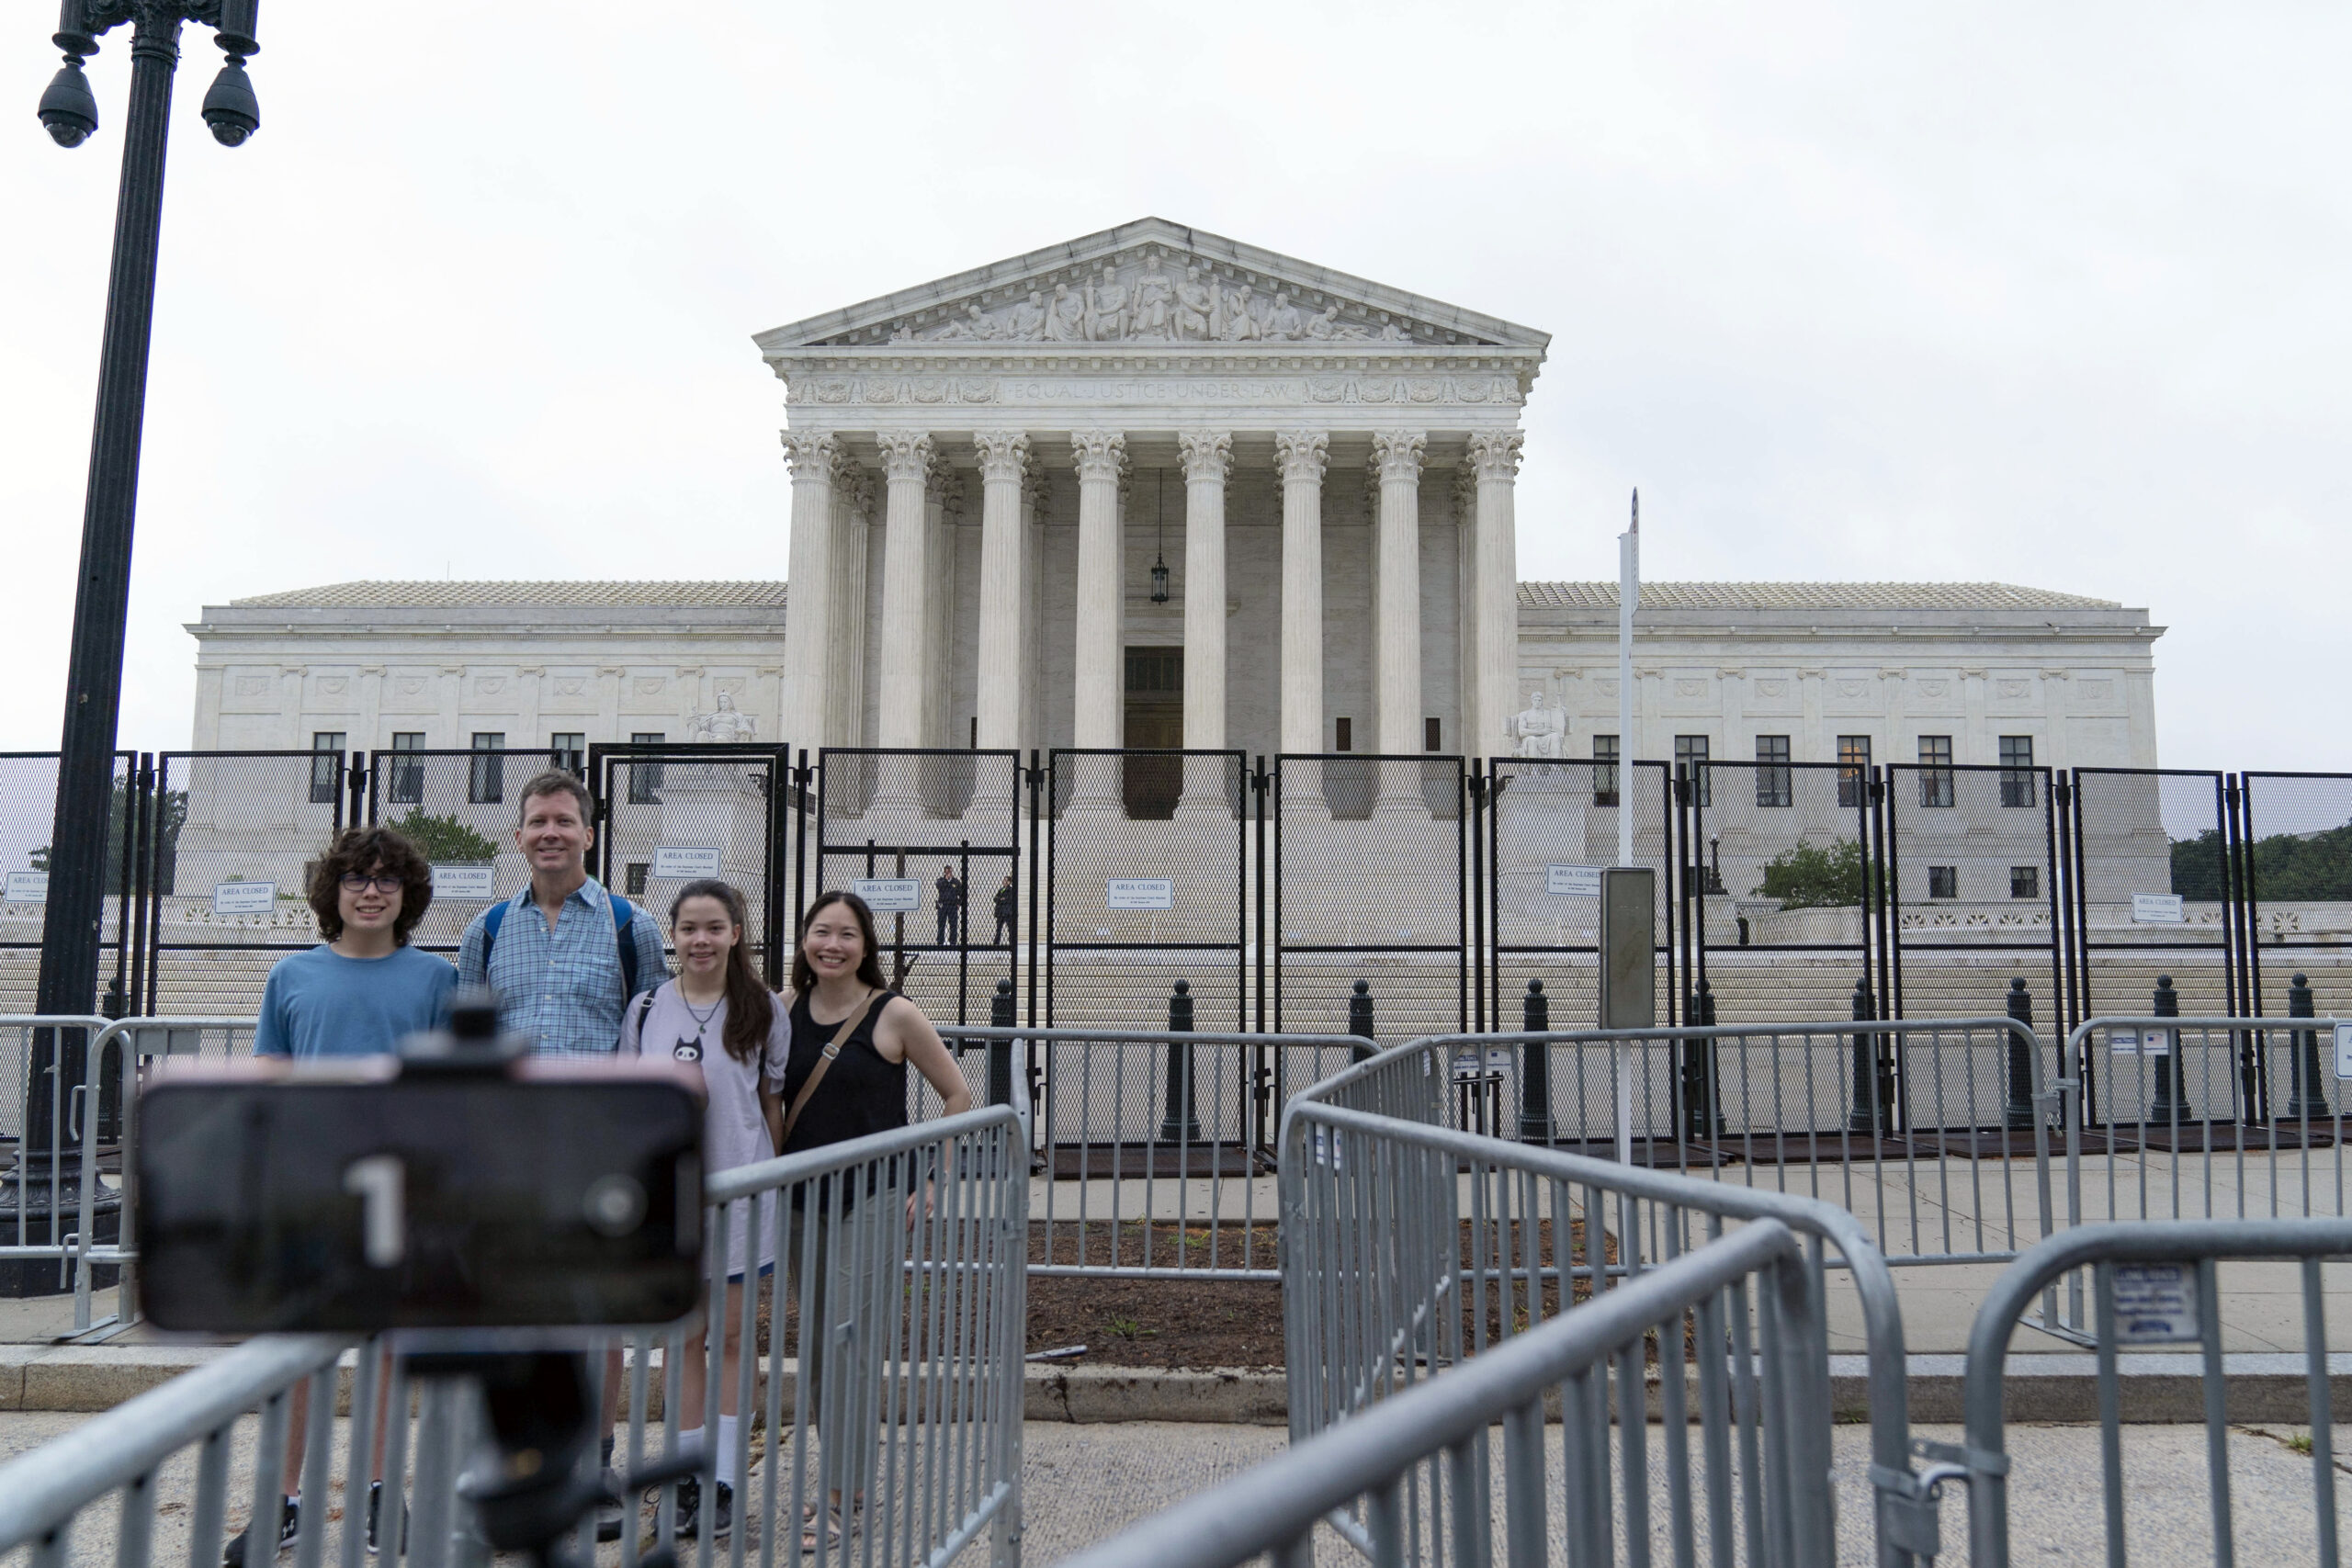 A family takes a selfie outside of the U.S. Supreme Court on Capitol Hill in Washington, Thursday, June 23, 2022. (AP Photo/Jose Luis Magana)